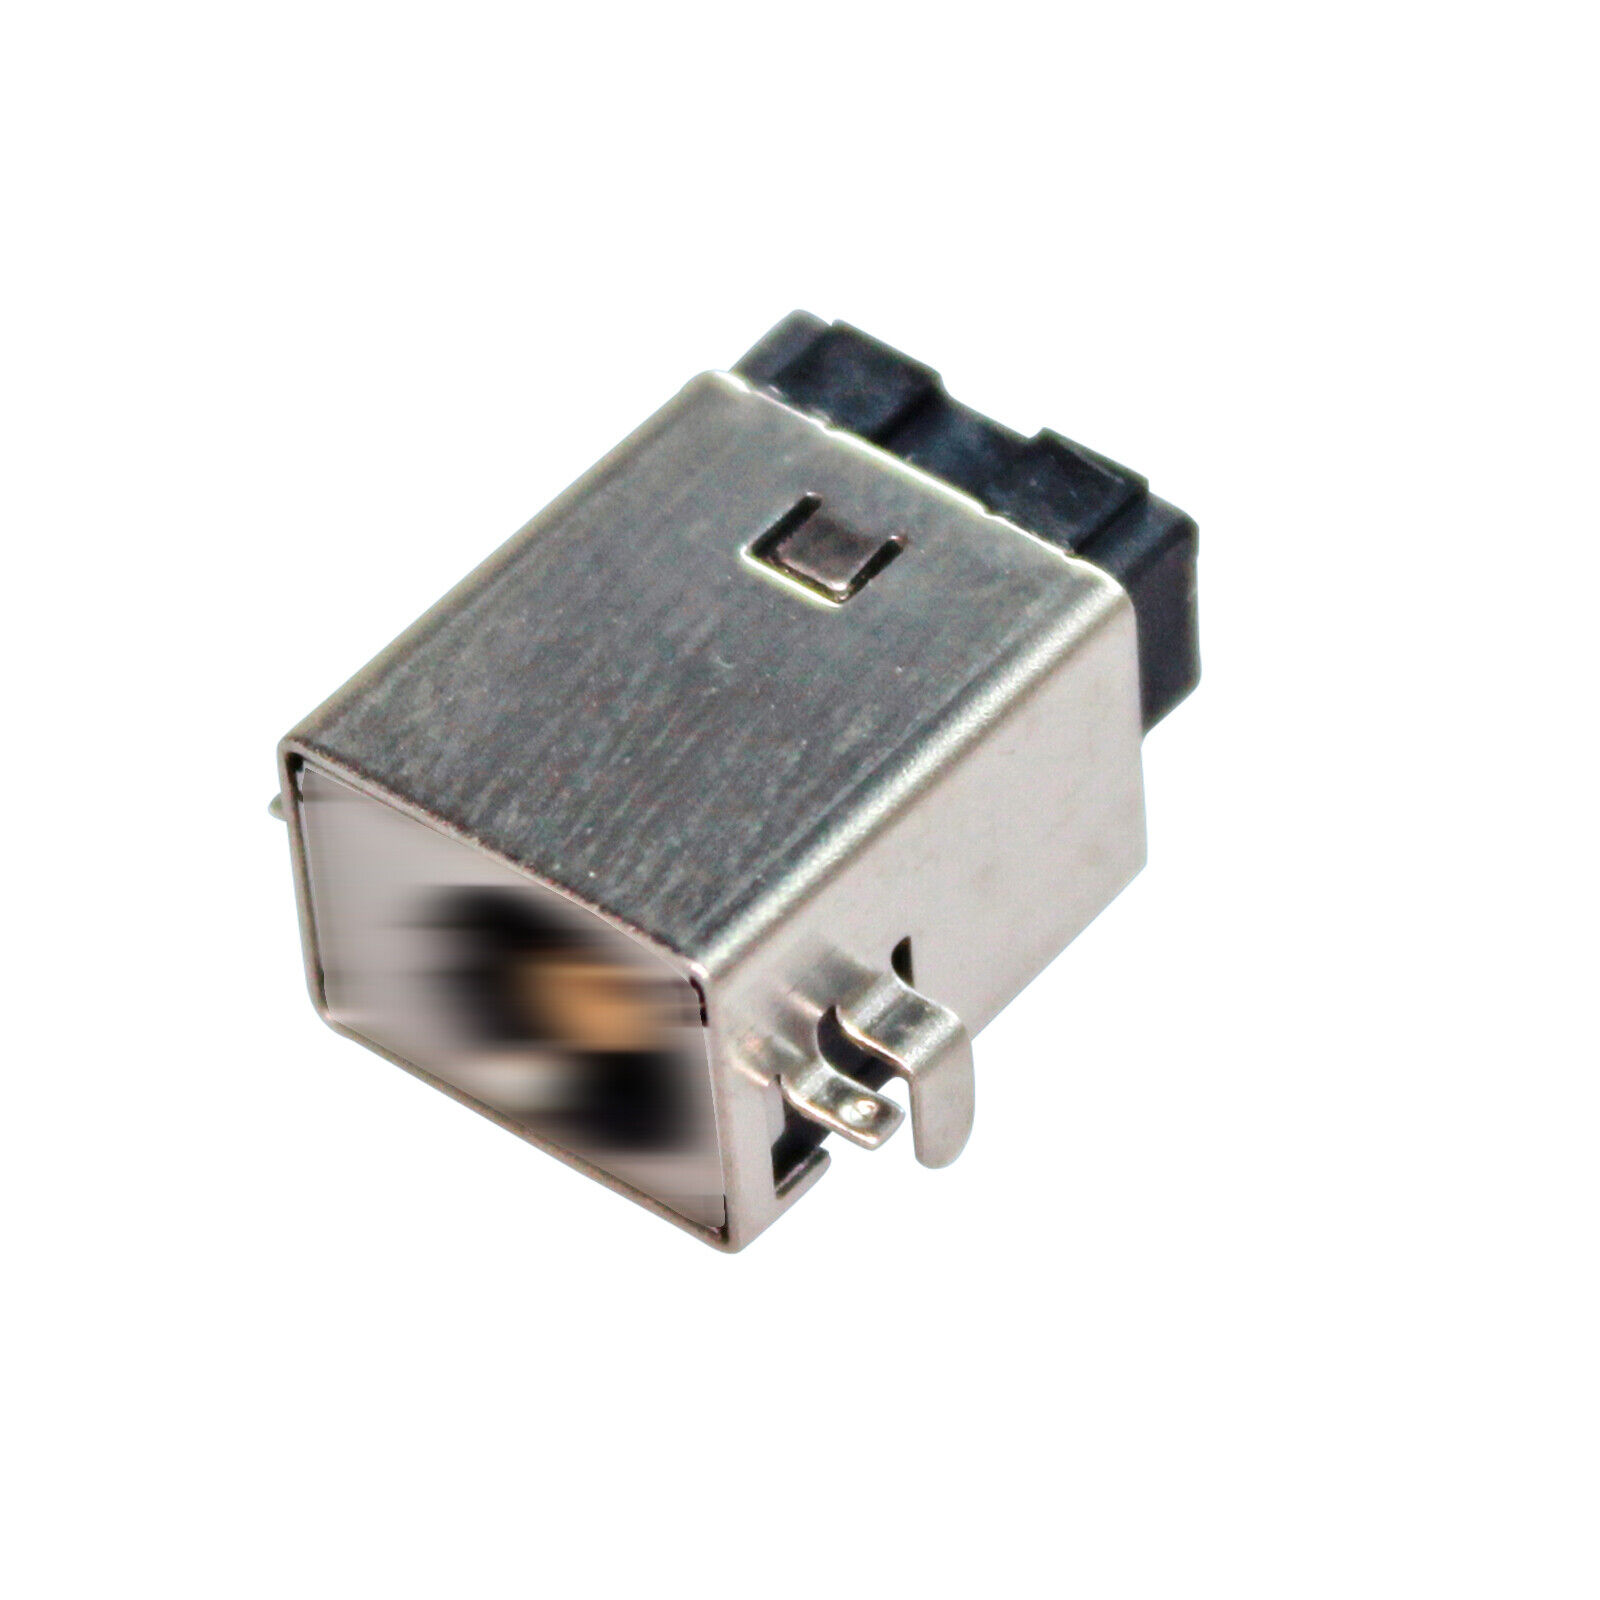 Cyberpower PC cyberpowerPC tracer 3 tracer lll dc jack power socket  port 